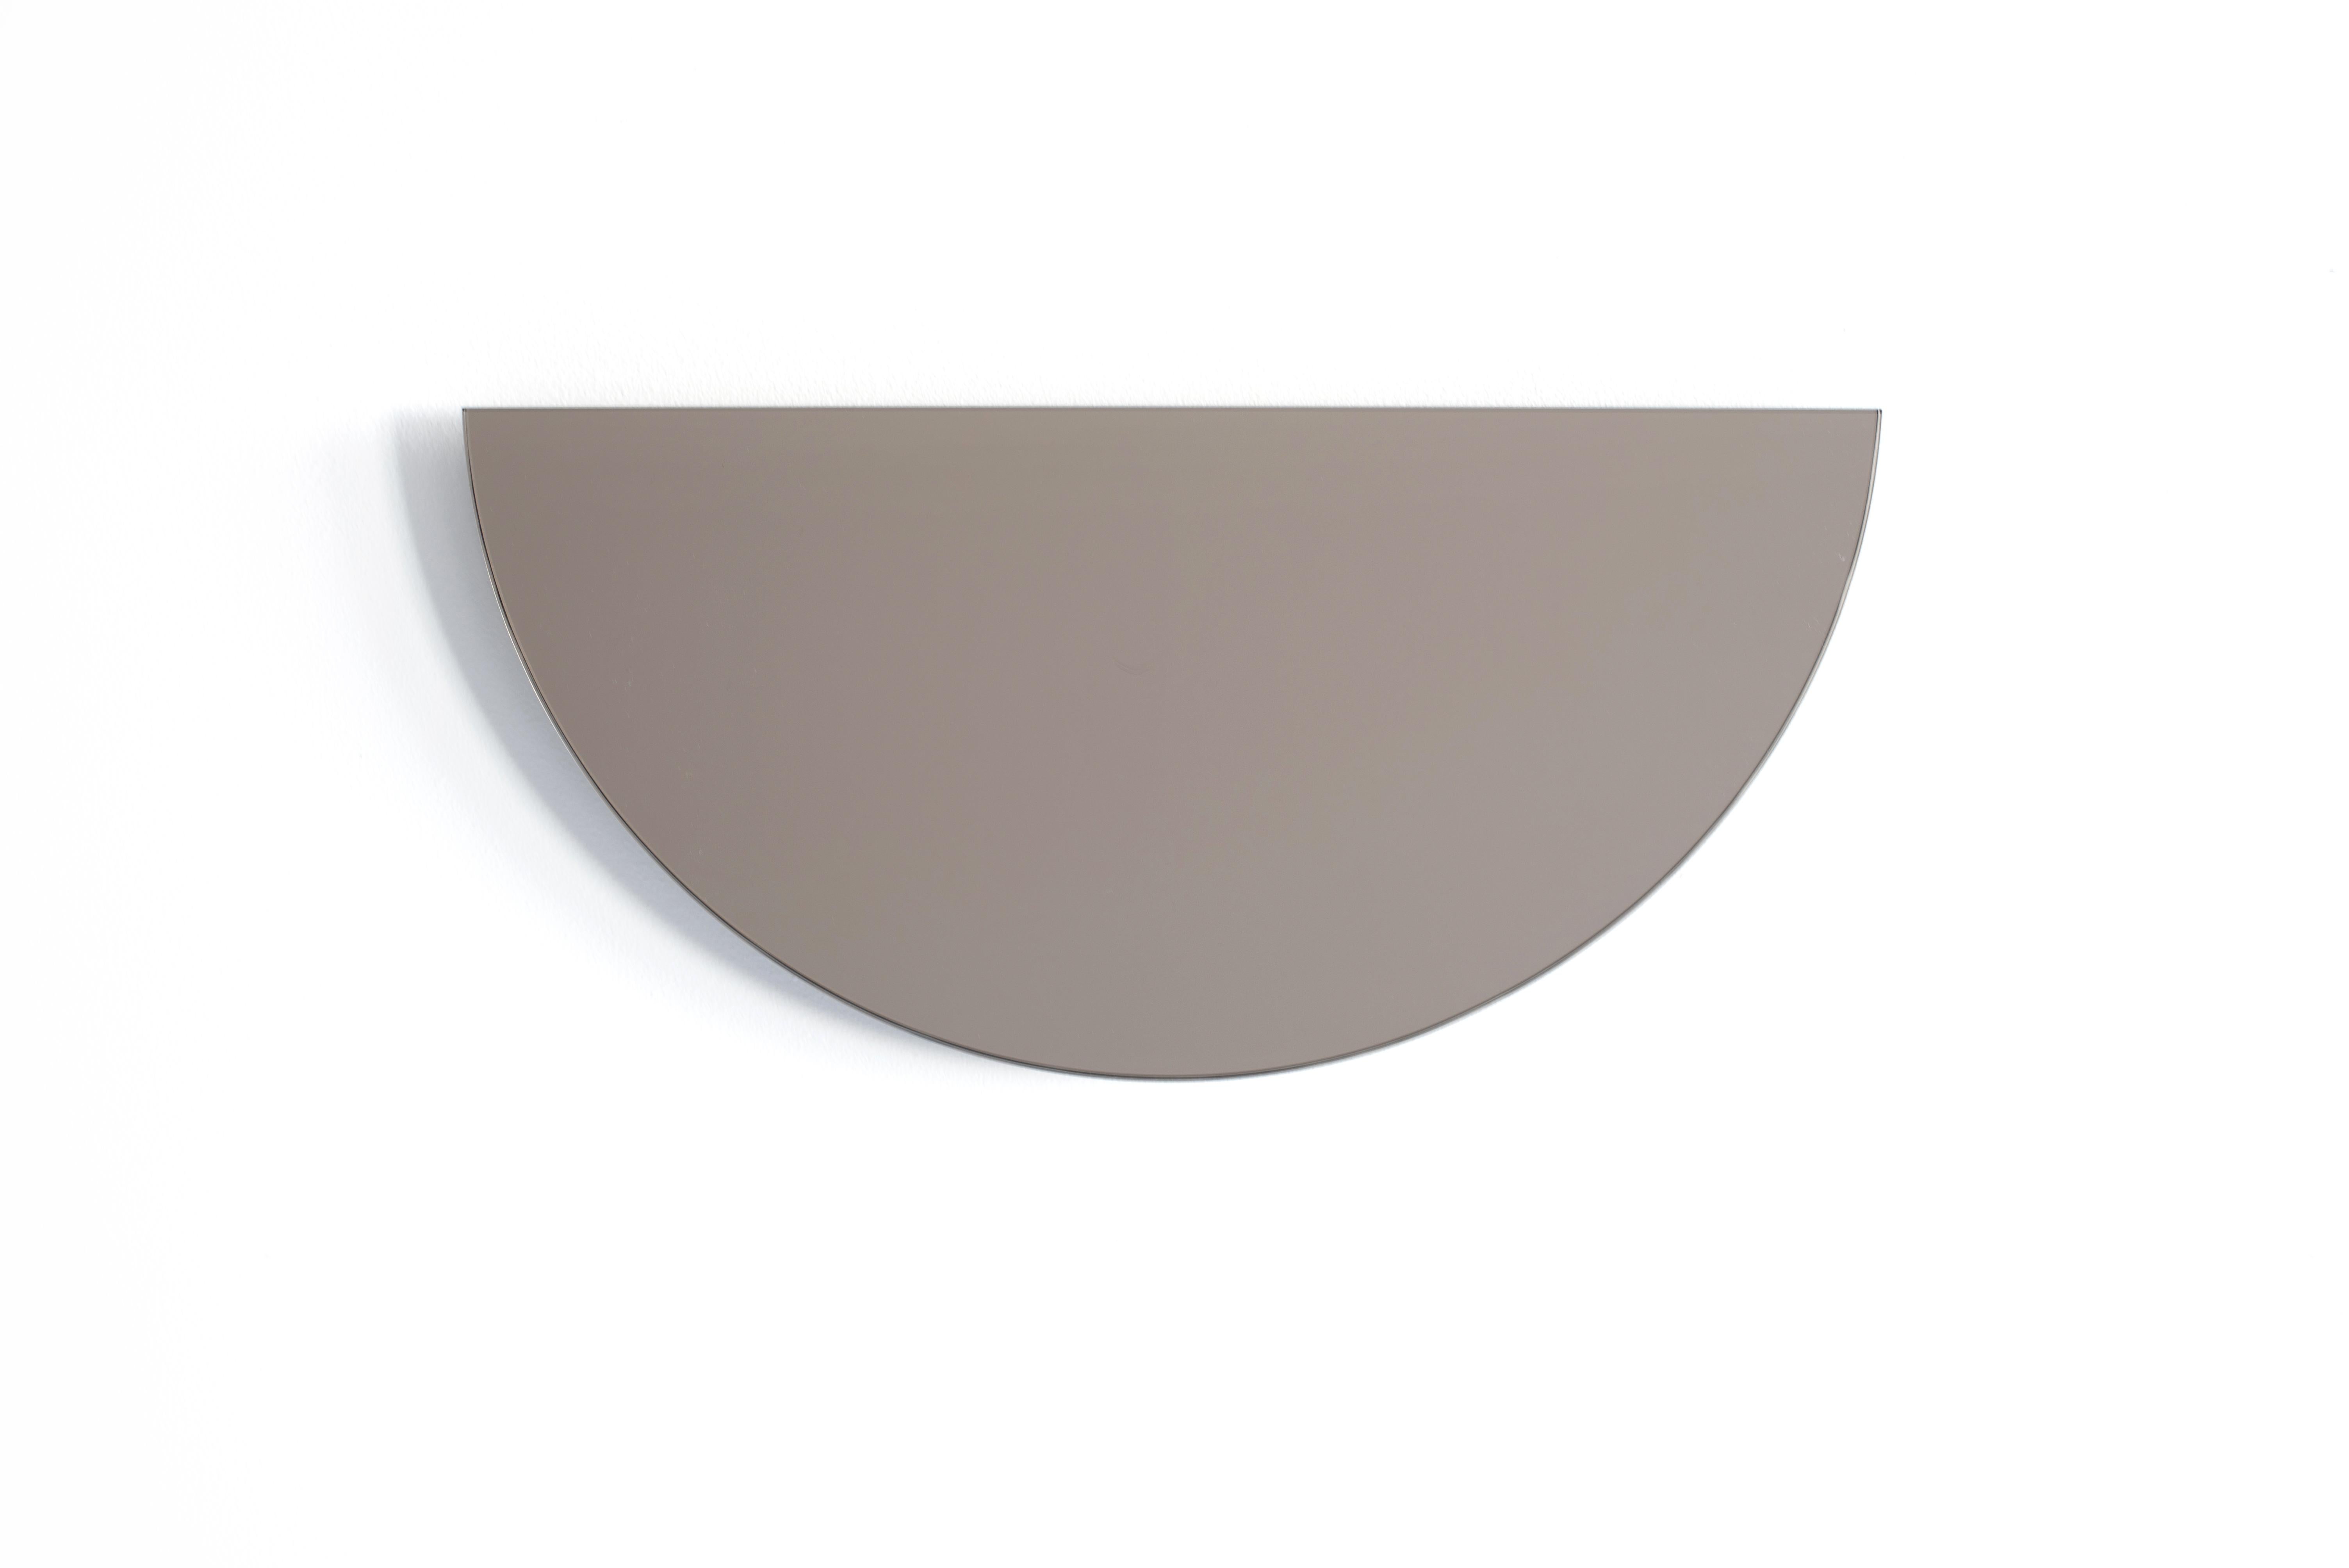 American Set of Small Half Moon Mirrors - Little Moons Mirrors by Ben & Aja Blanc For Sale